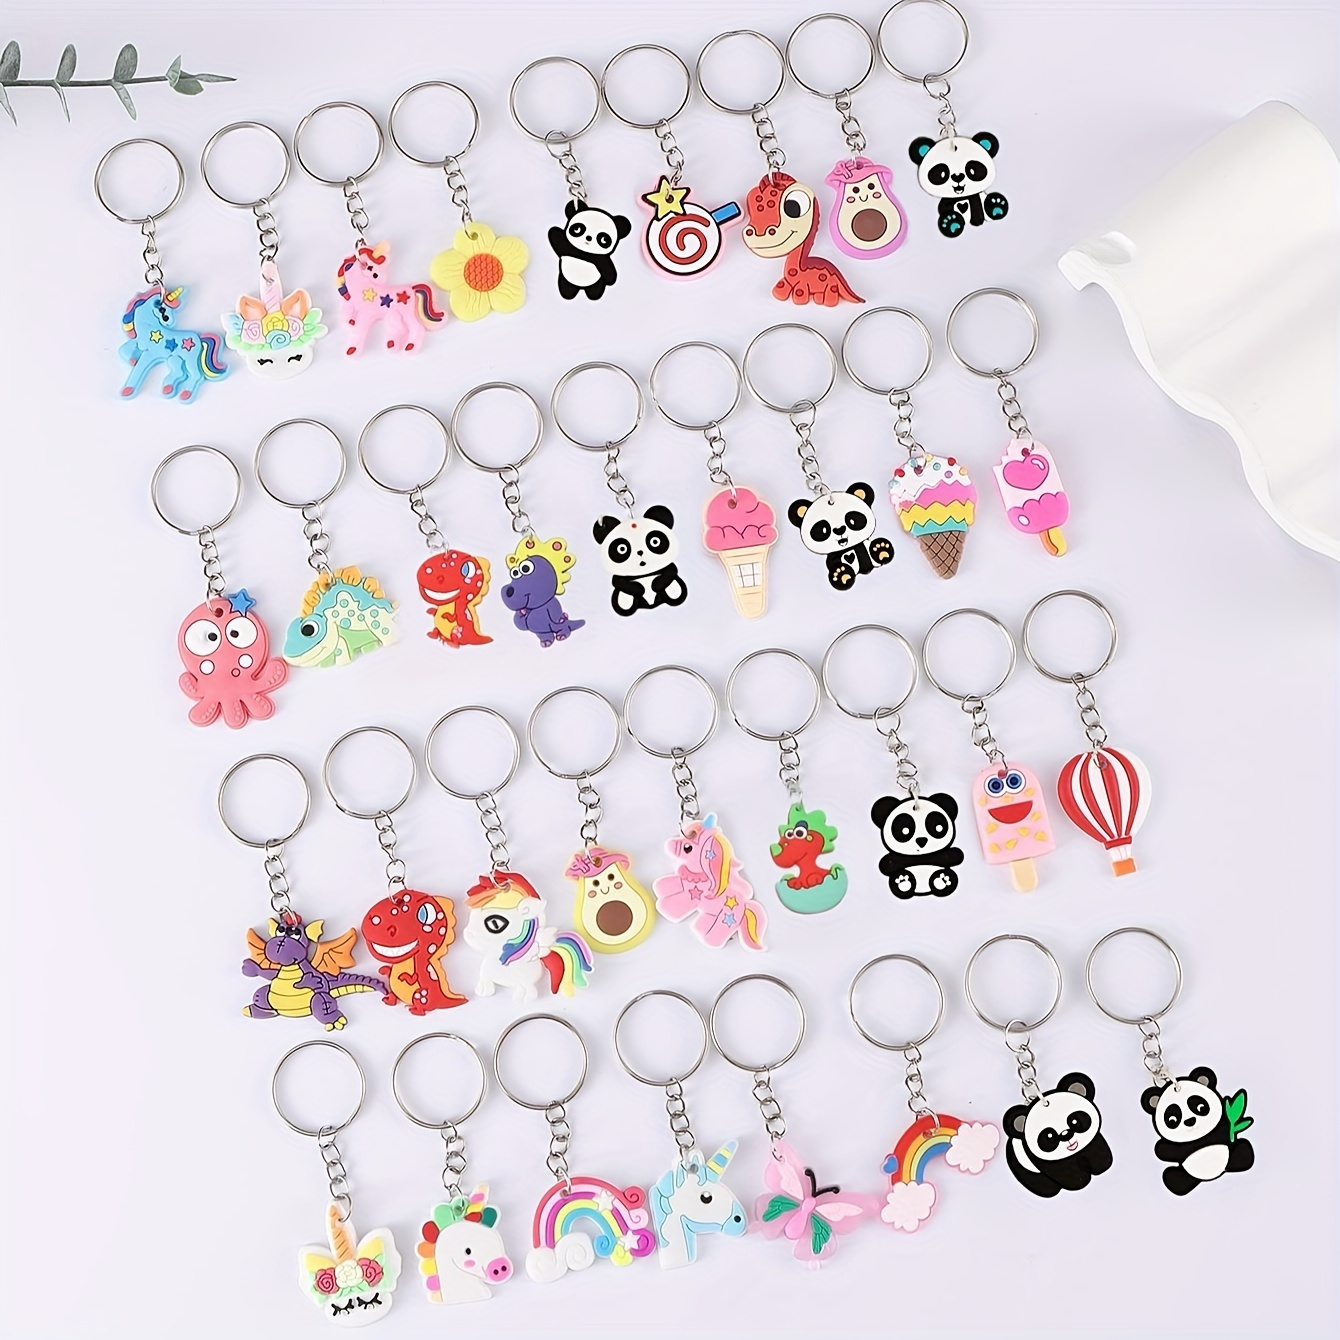 

100-piece Adorable Cartoon & Animal Keychain Collection - Colorful Pvc Charms For Bags, Backpacks & Phones - Ideal Accessories For Young Individuals